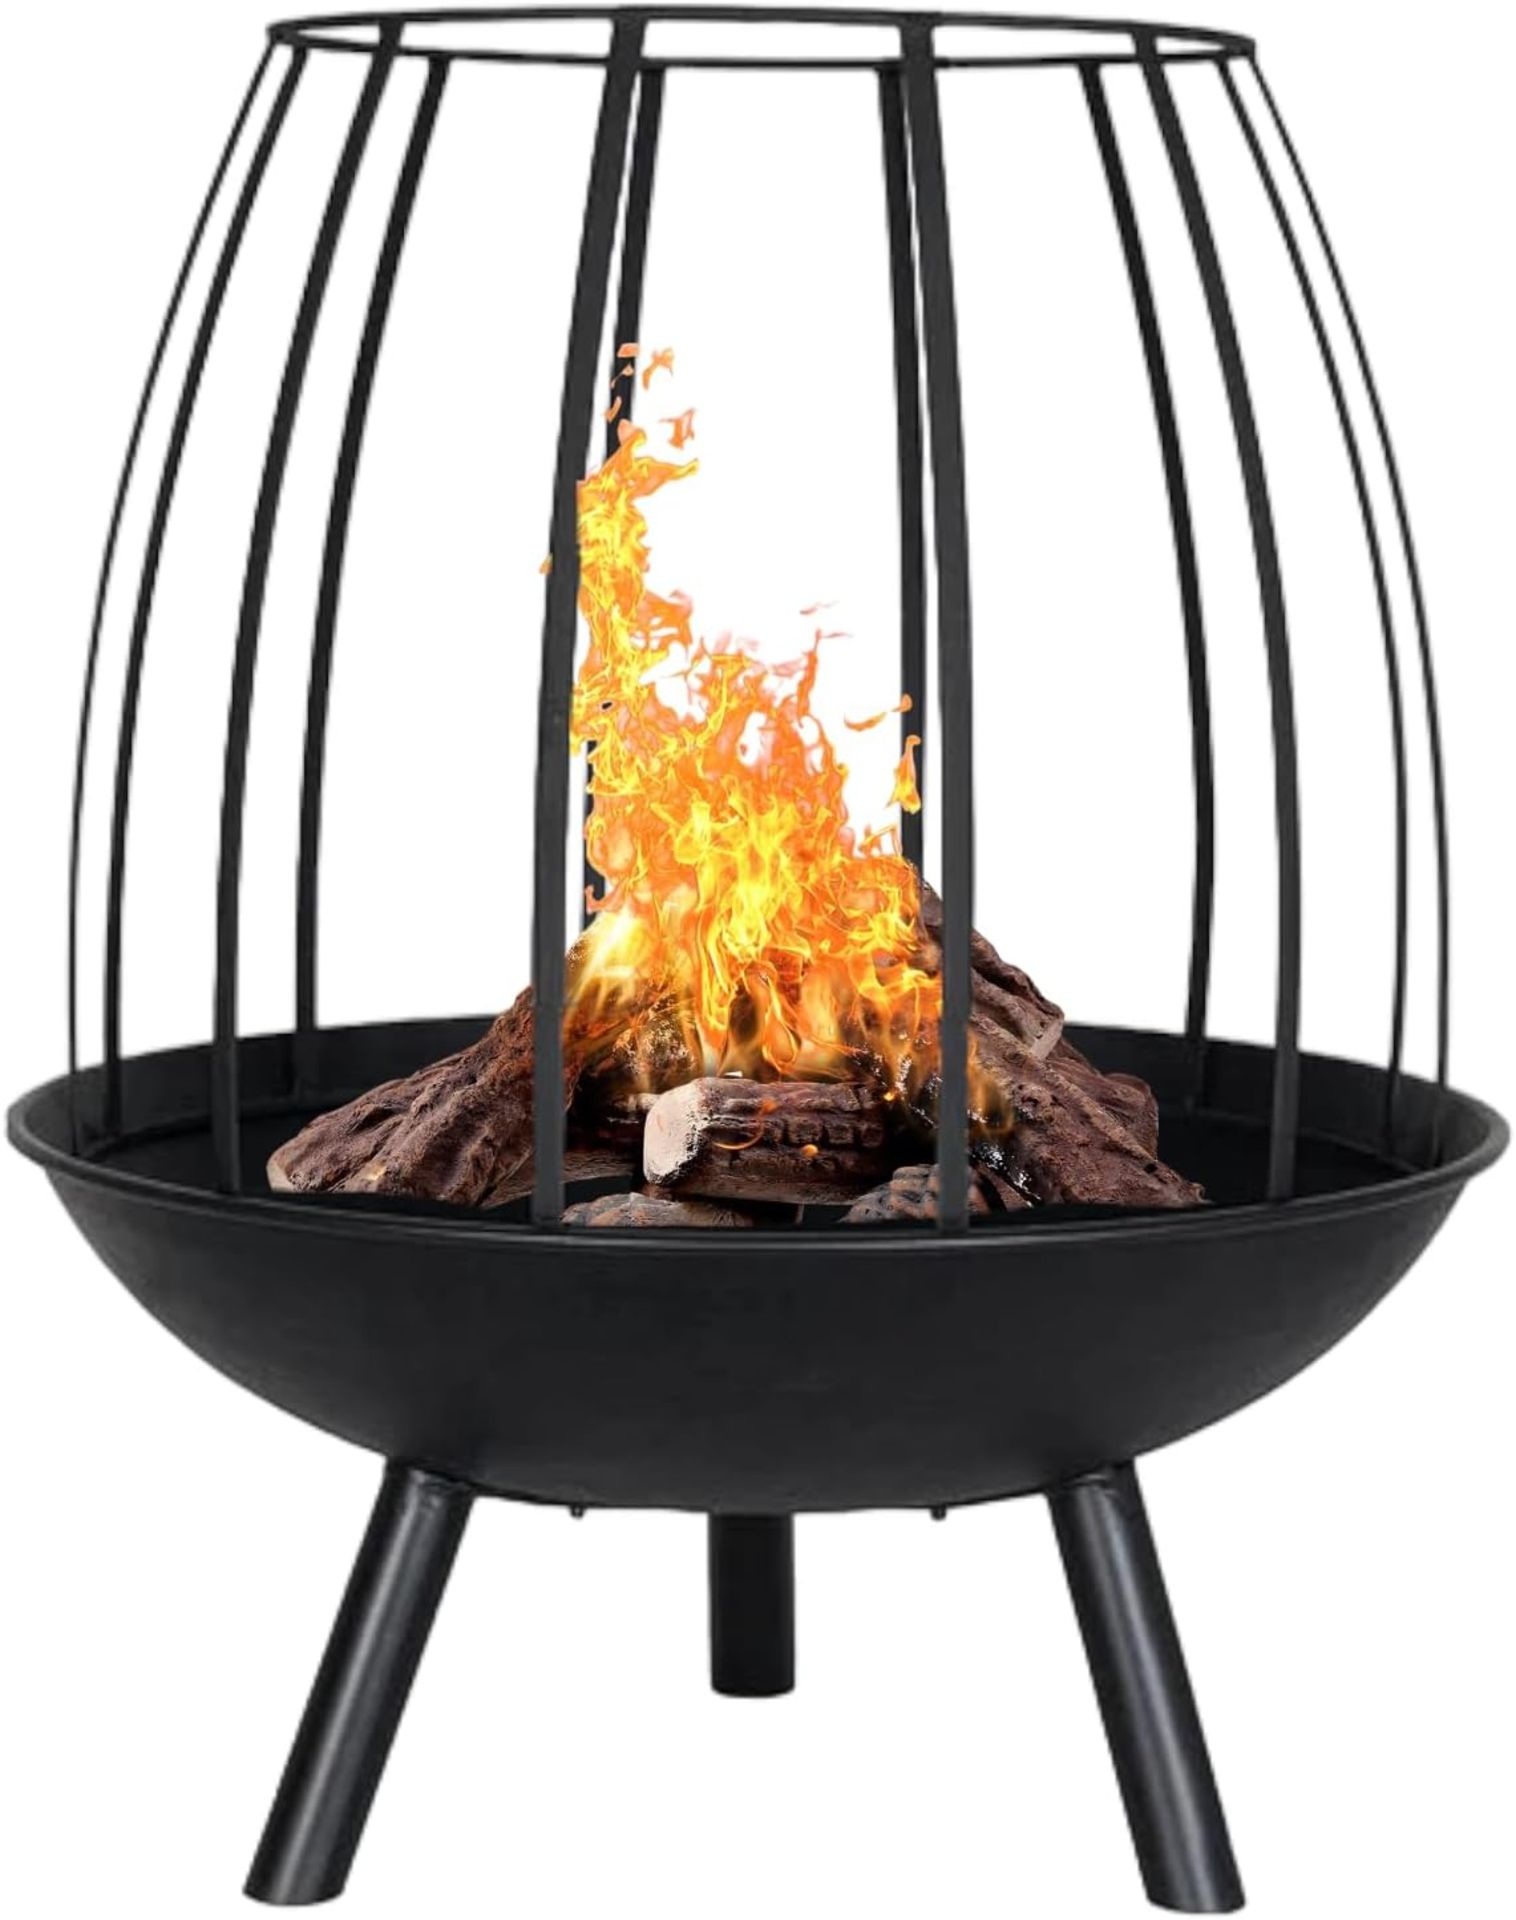 TRADE LOT 4 x NEW & BOXED LA HACIENDA Circular Open Firepit. RRP £139.99 EACH. Simple and stylish,